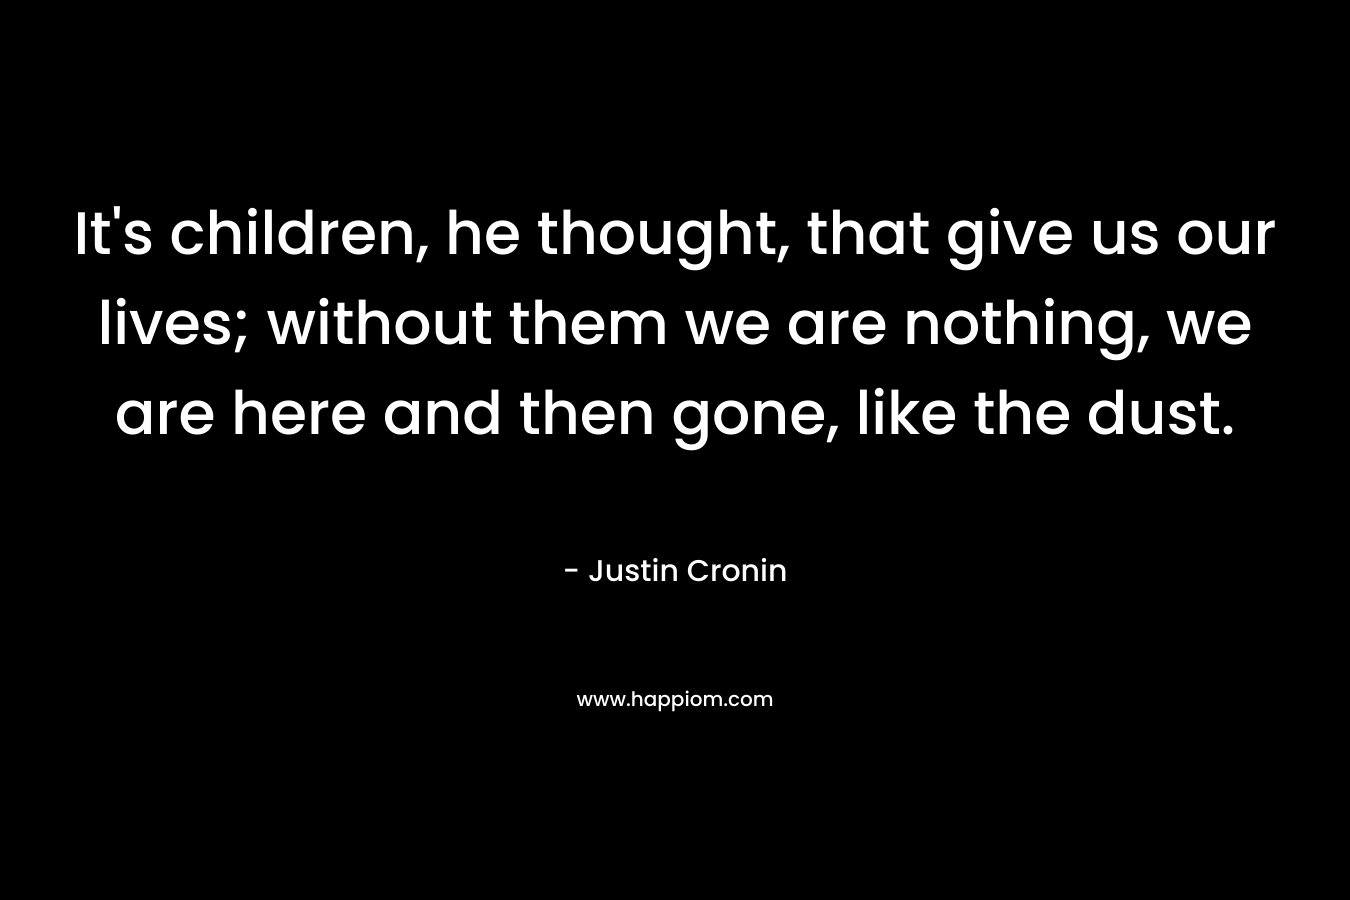 It's children, he thought, that give us our lives; without them we are nothing, we are here and then gone, like the dust.